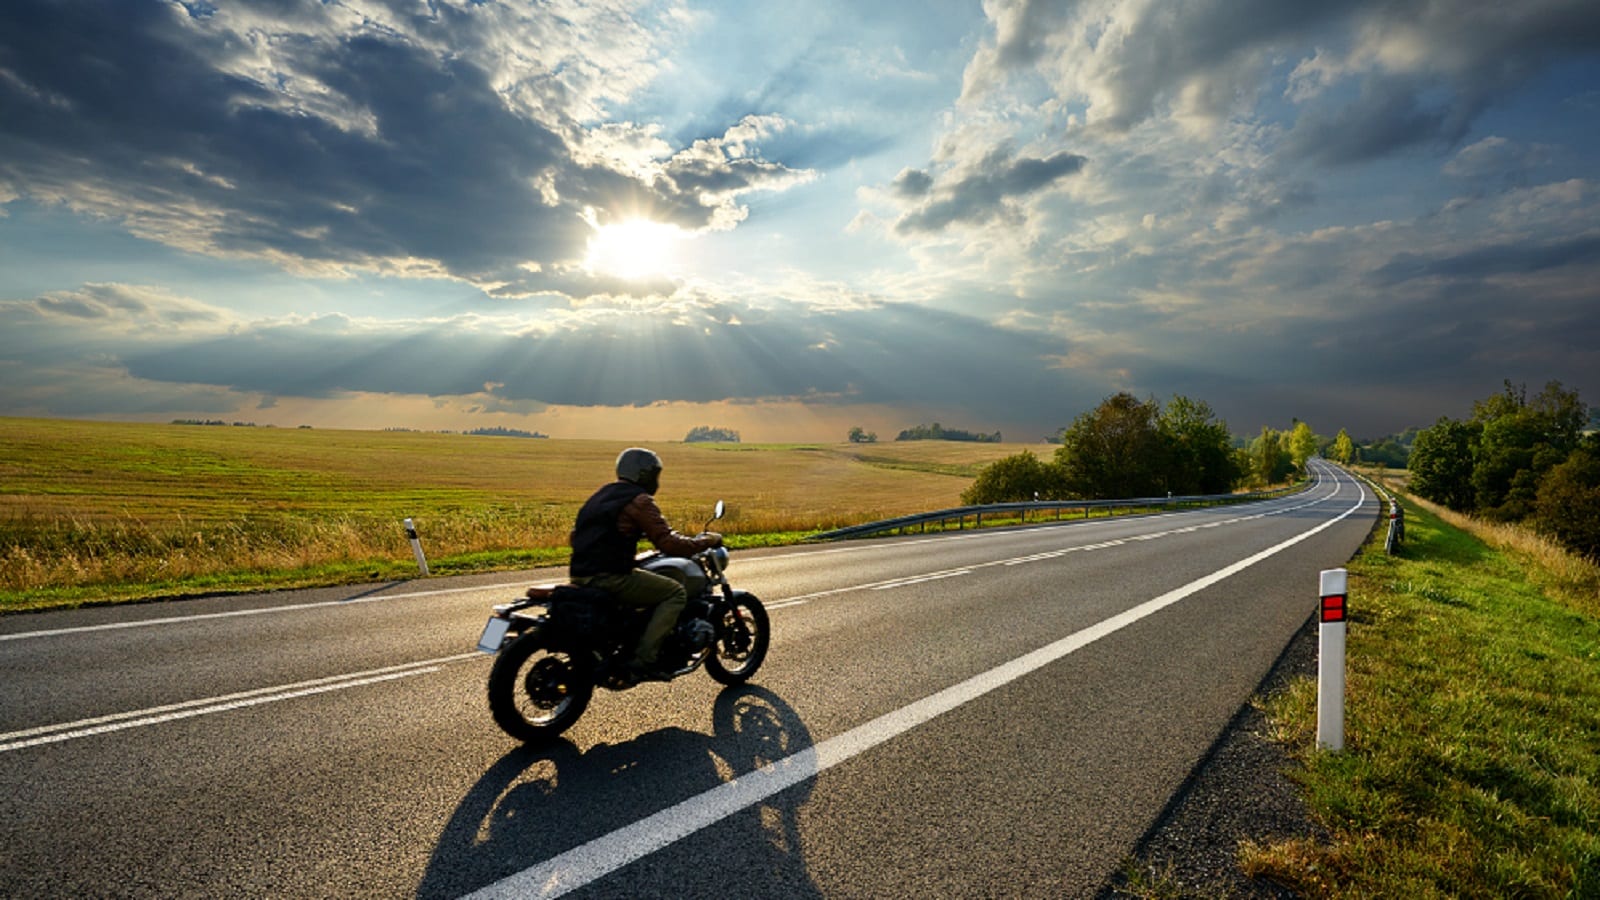 Man Riding Motorcycle In Rural Area Stock Photo